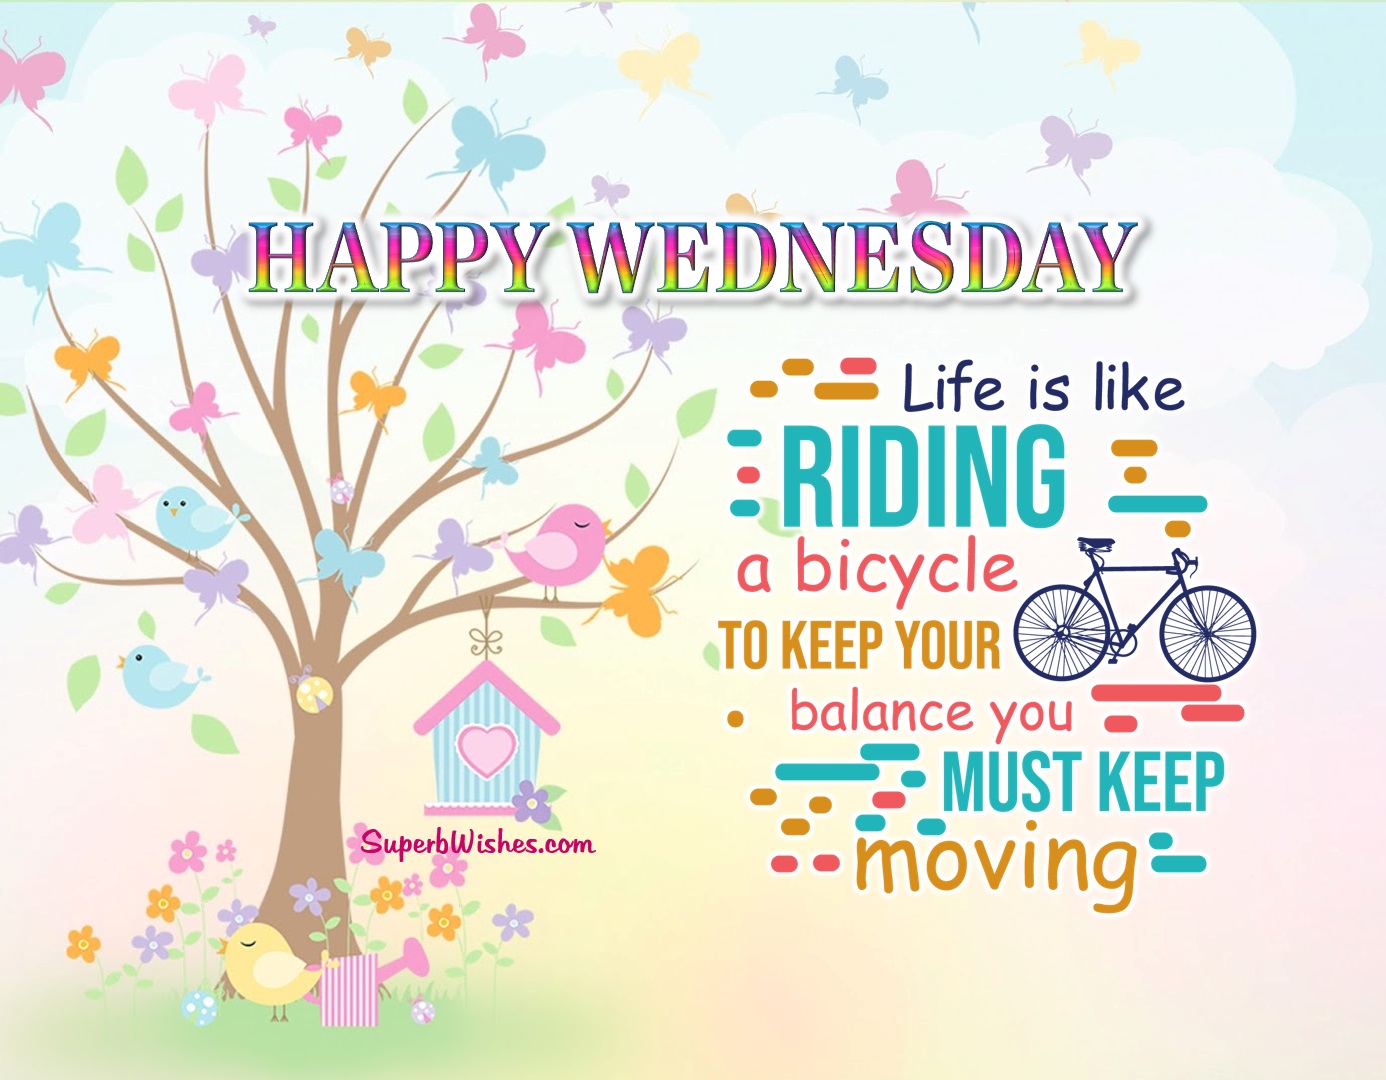 Happy Wednesday 2023 Images - You Must Keep Moving | SuperbWishes